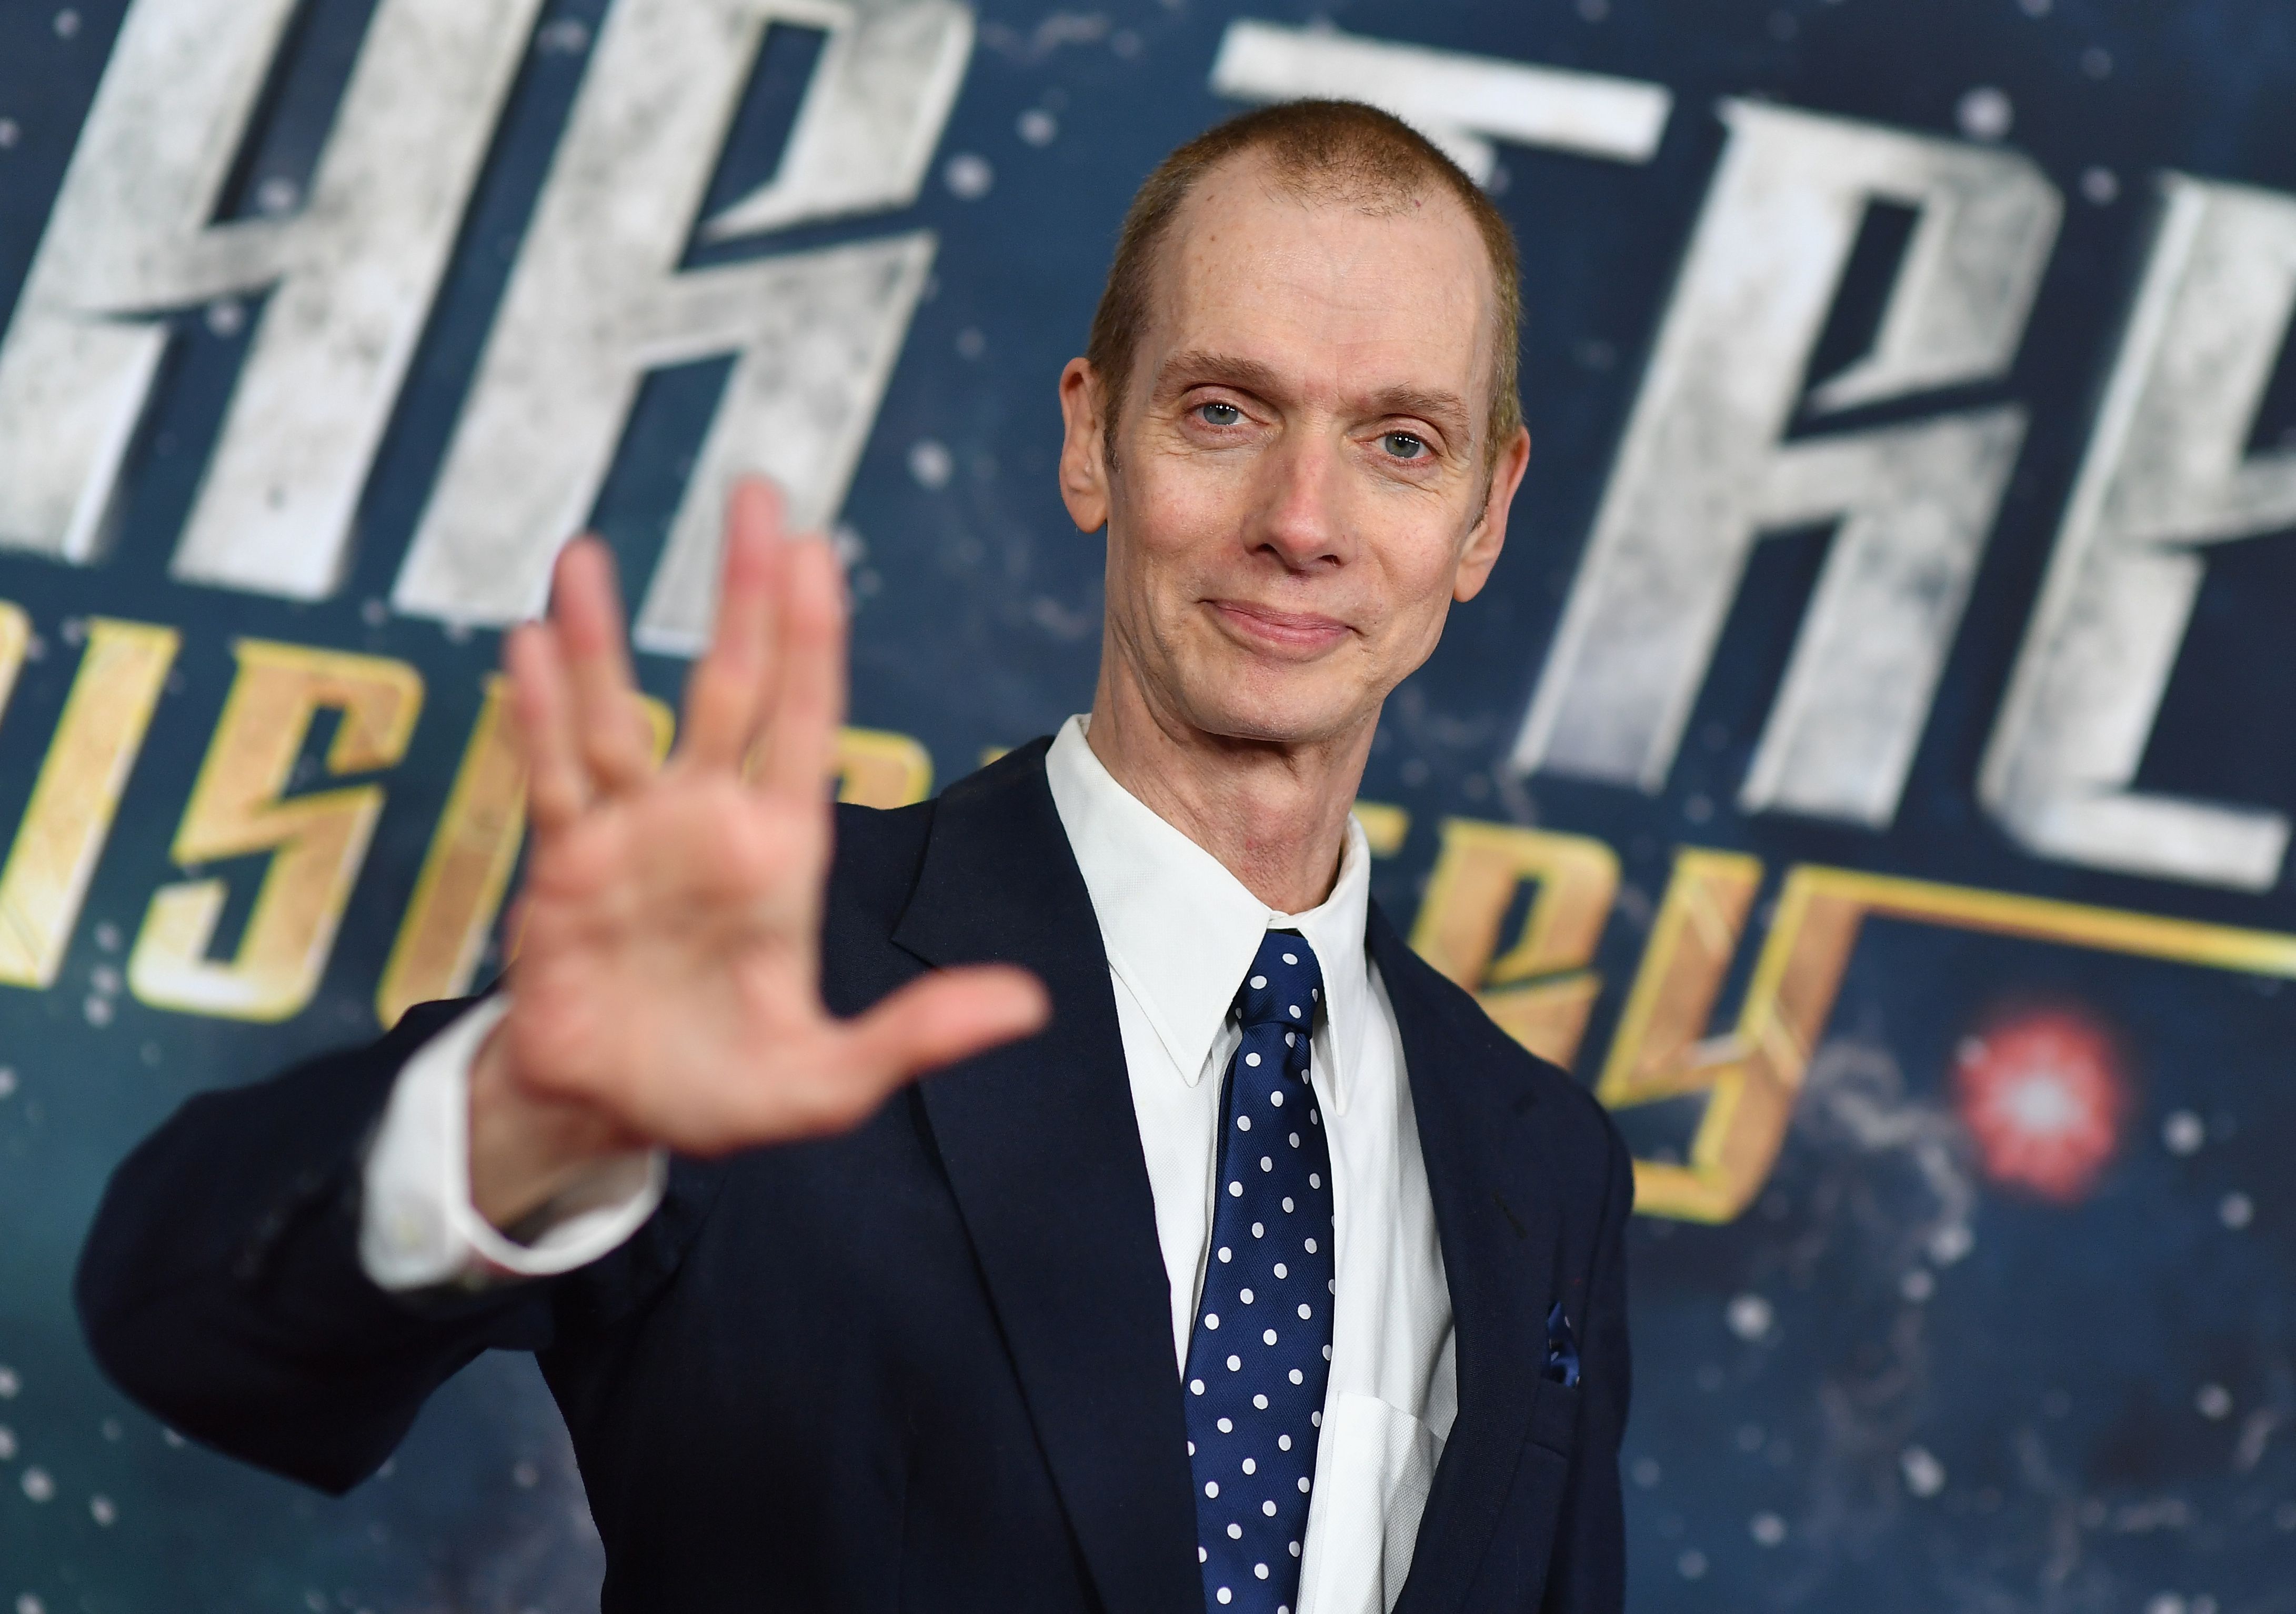 Doug Jones actor from Hocus Pocus poses at a premiere